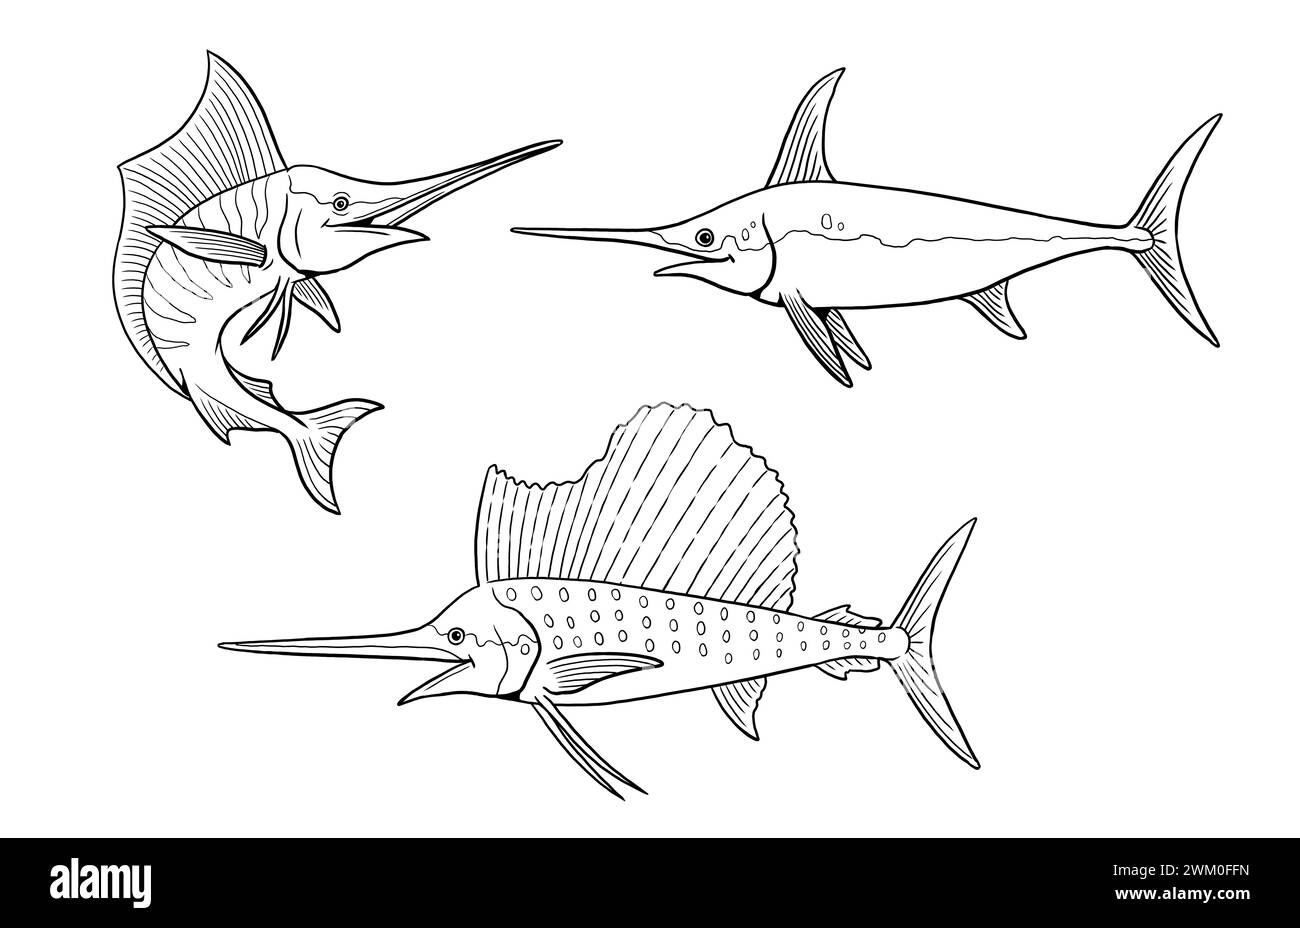 Set of different swordfish to color in. Template for a coloring book with fish. Coloring template for kids. Stock Photo